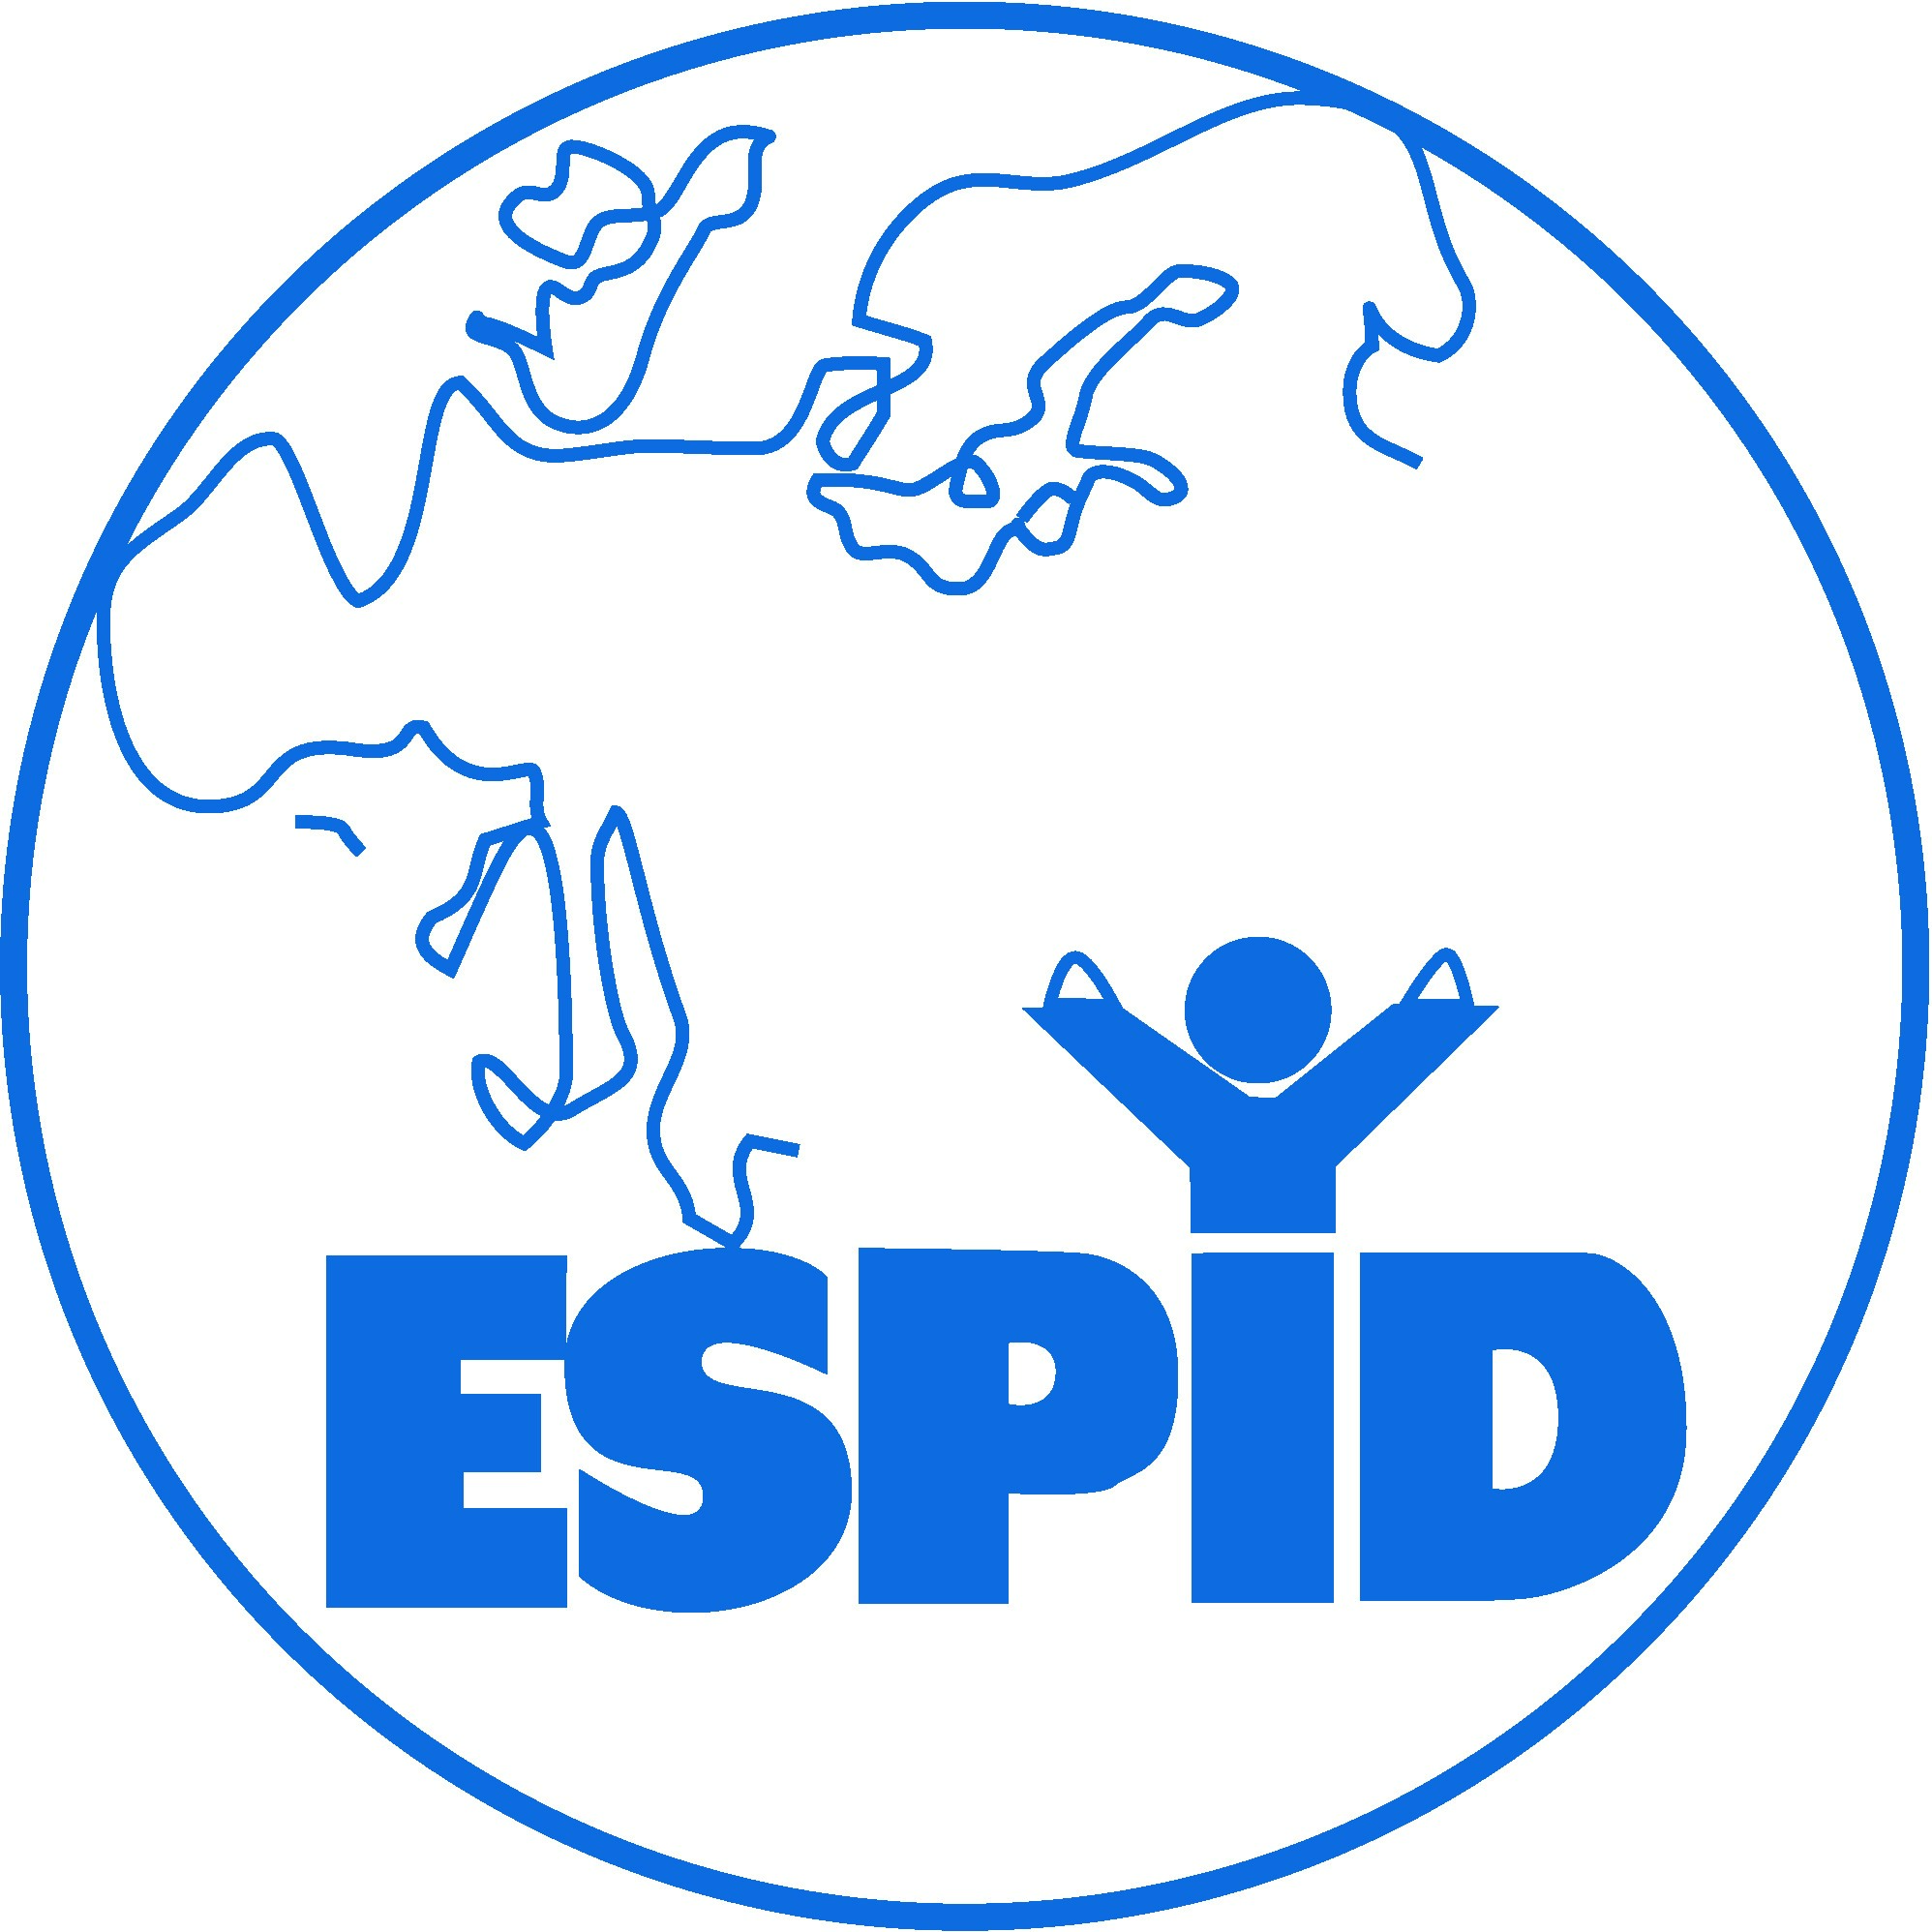 ESPID 2022 - The 40th Meeting of The European Society for Paediatric Infectious Diseases